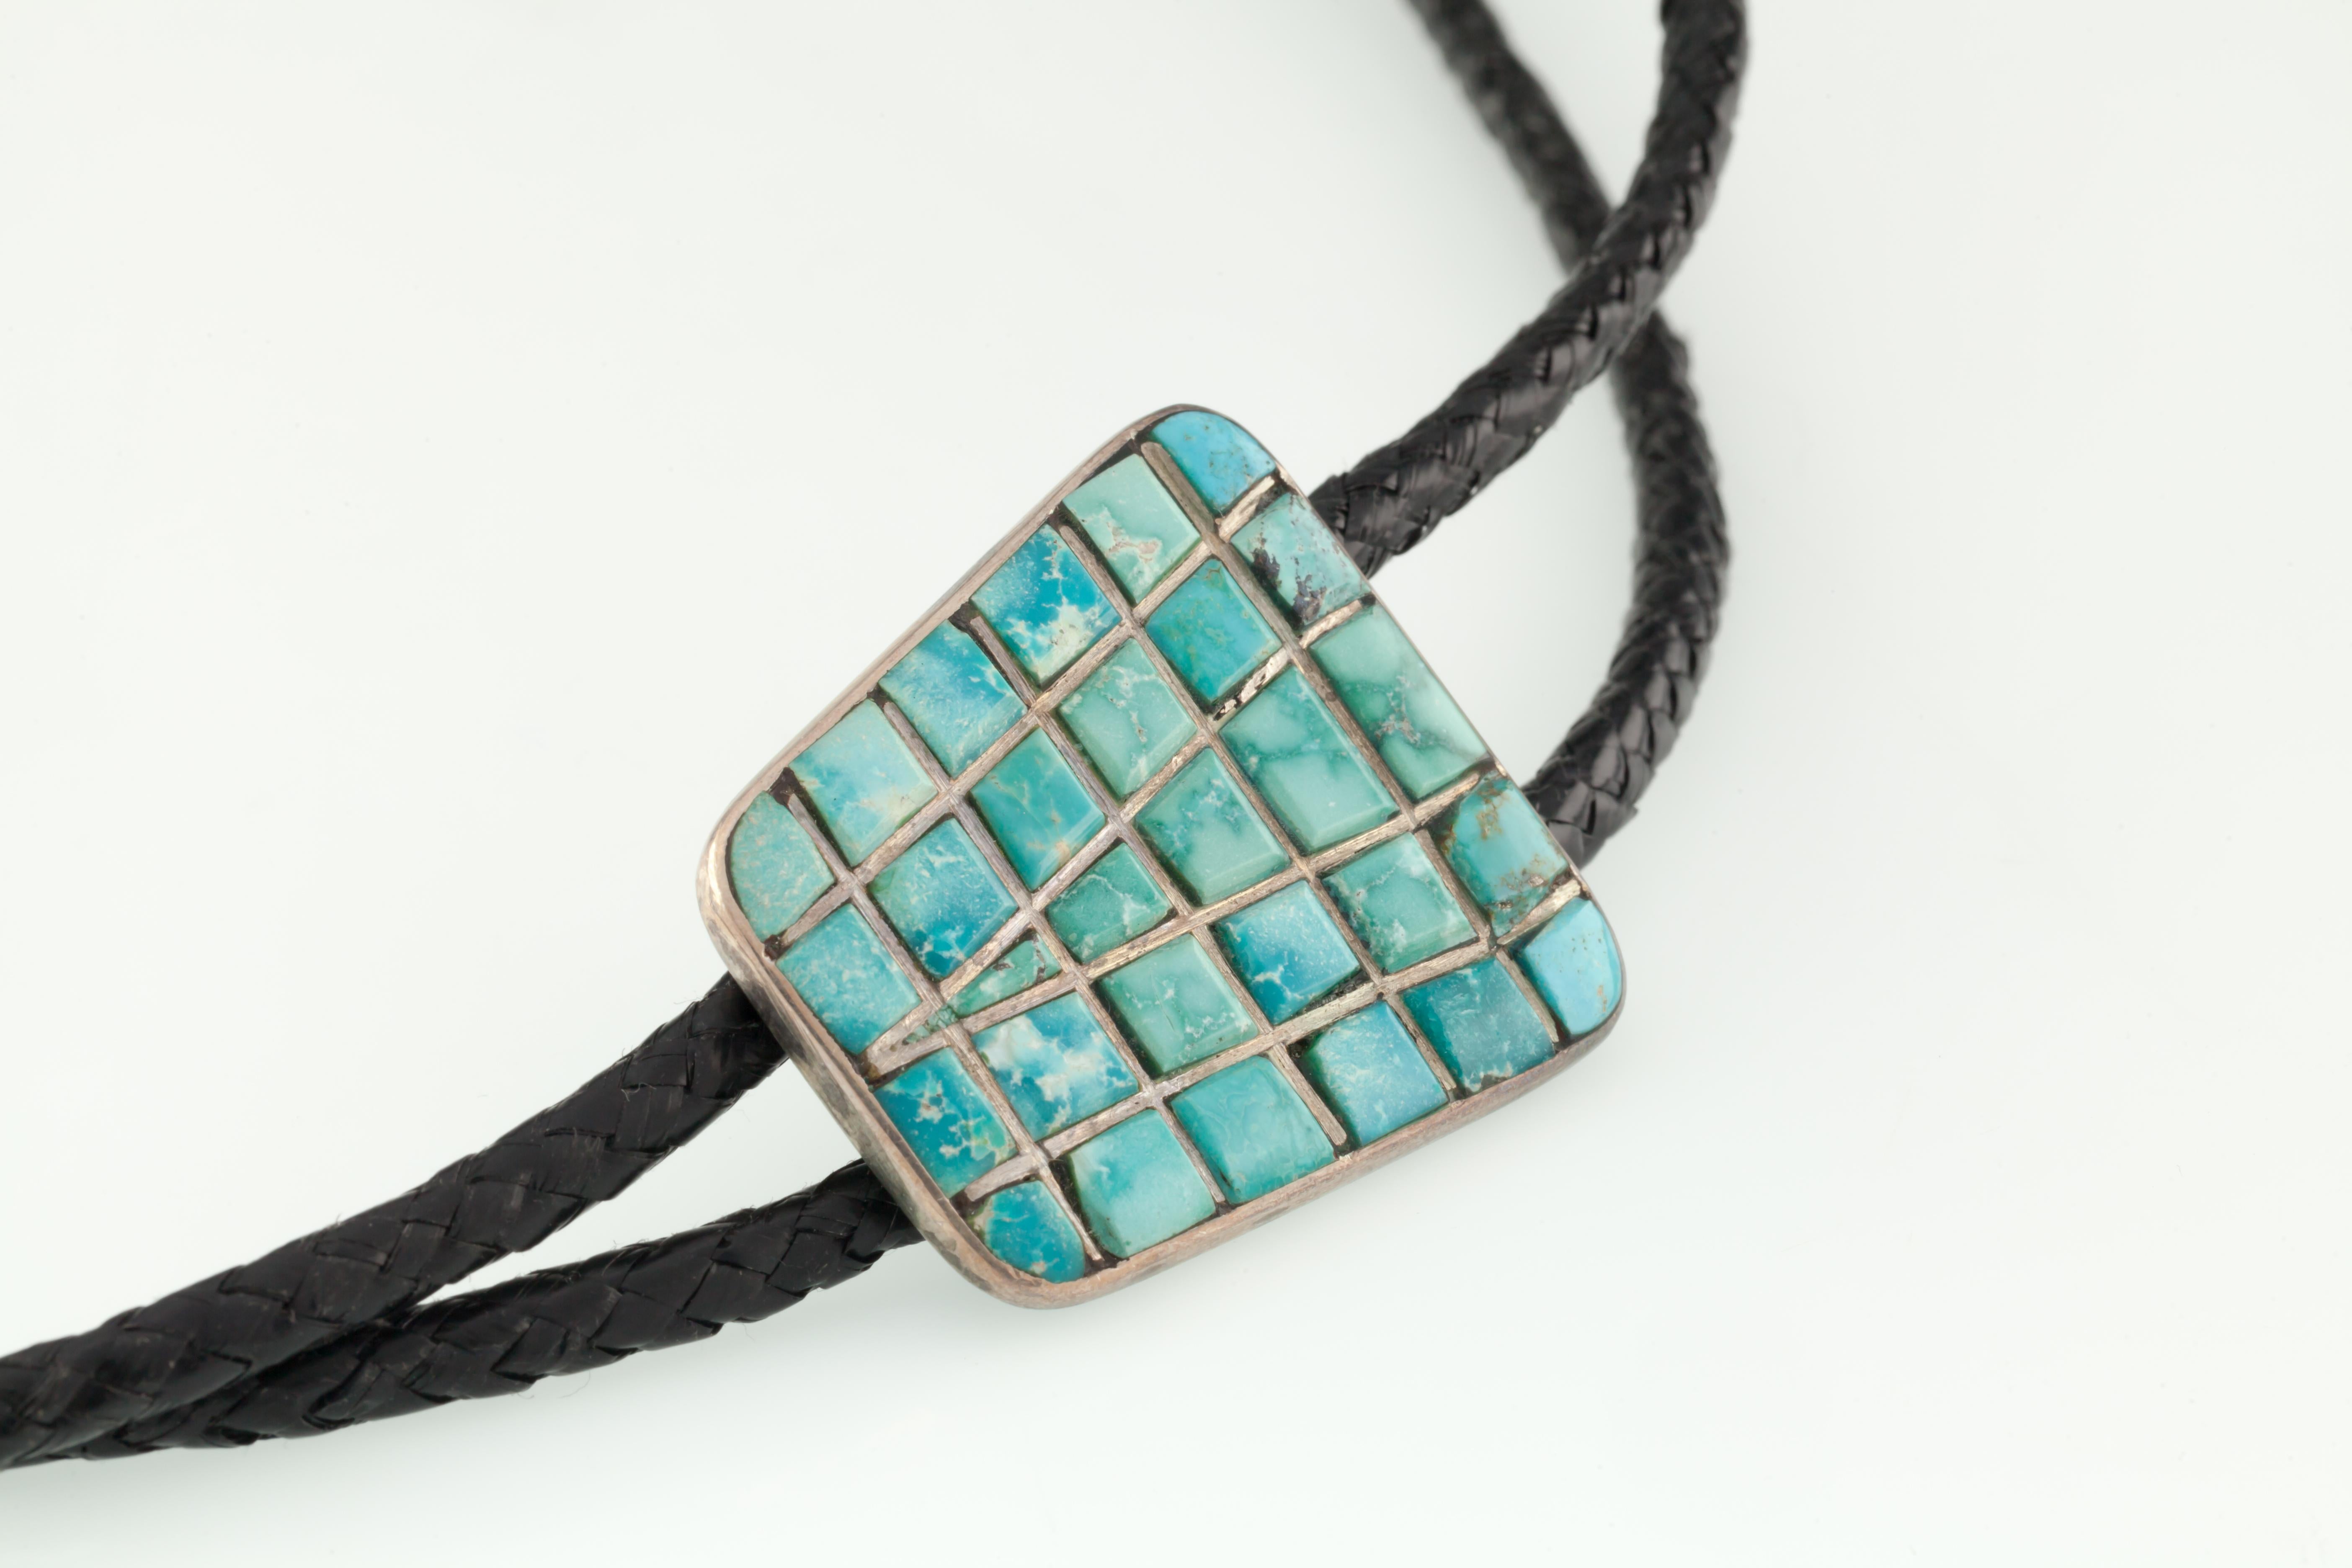 Vintage Zuni Hand-Signed Turquoise Inlay Sterling Silver Bolo Tie, Black Leather In Good Condition For Sale In Sherman Oaks, CA